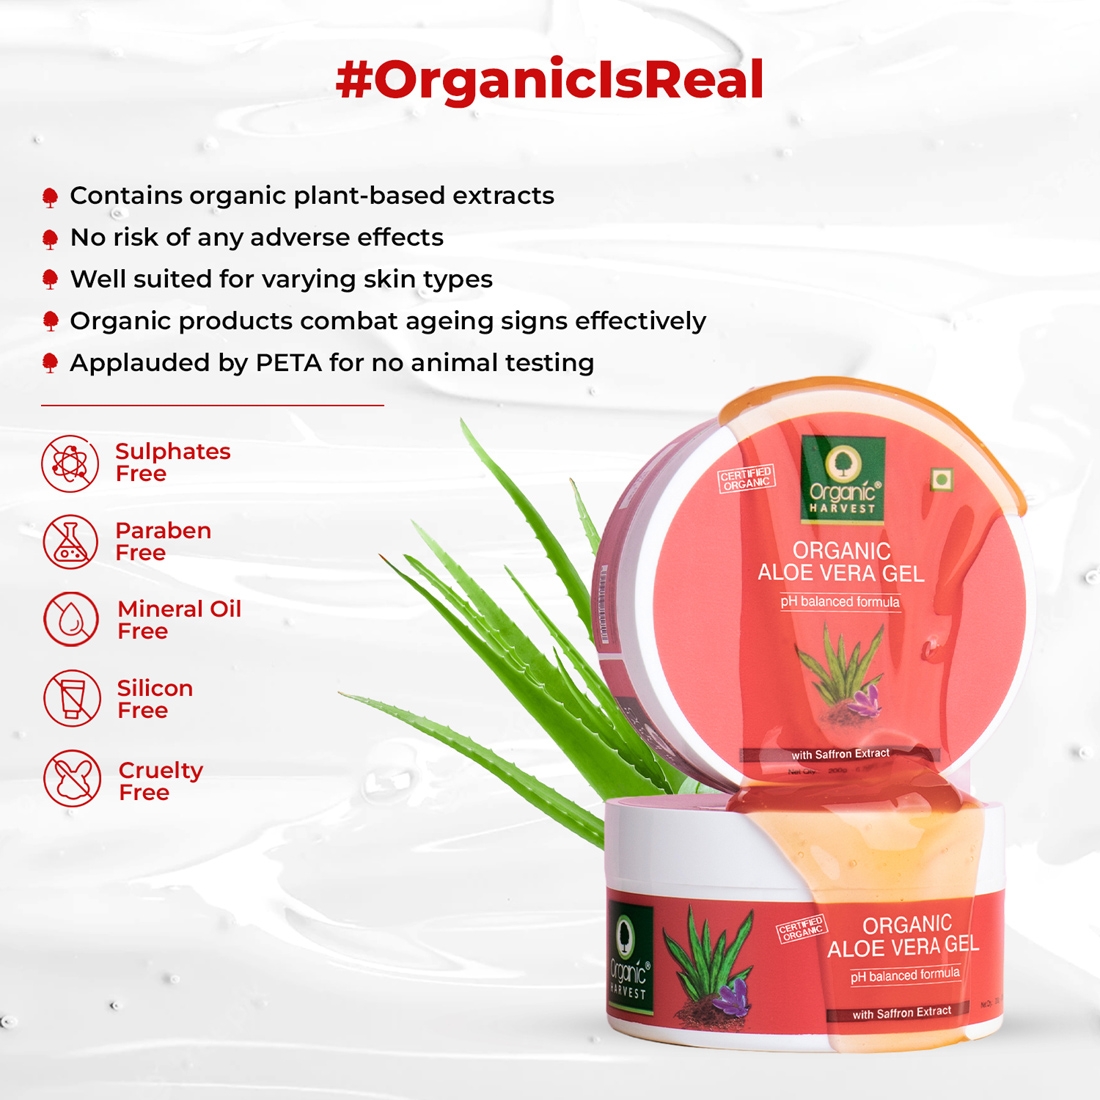 Organic Harvest Aloe Vera Gel Enriched with 100% Pure Aloe Vera Leaf & Saffron Extracts, for Skin And Hair, Paraben Free - 200gm